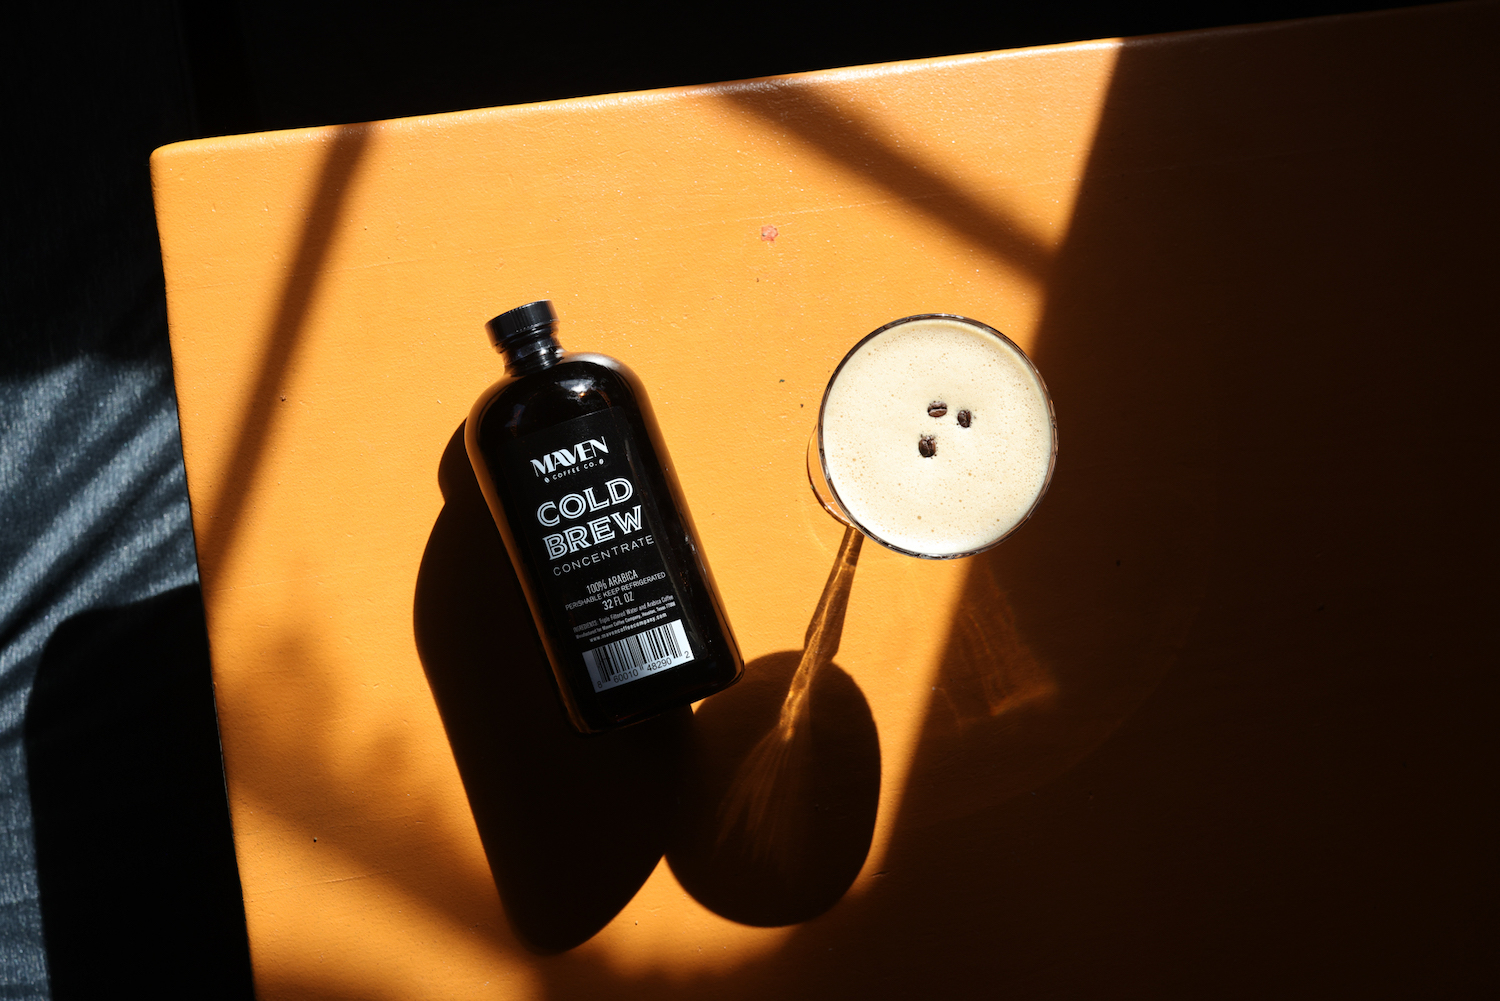 a bottle of maven cold brew next to an espresso martini on a yellow table with shadows